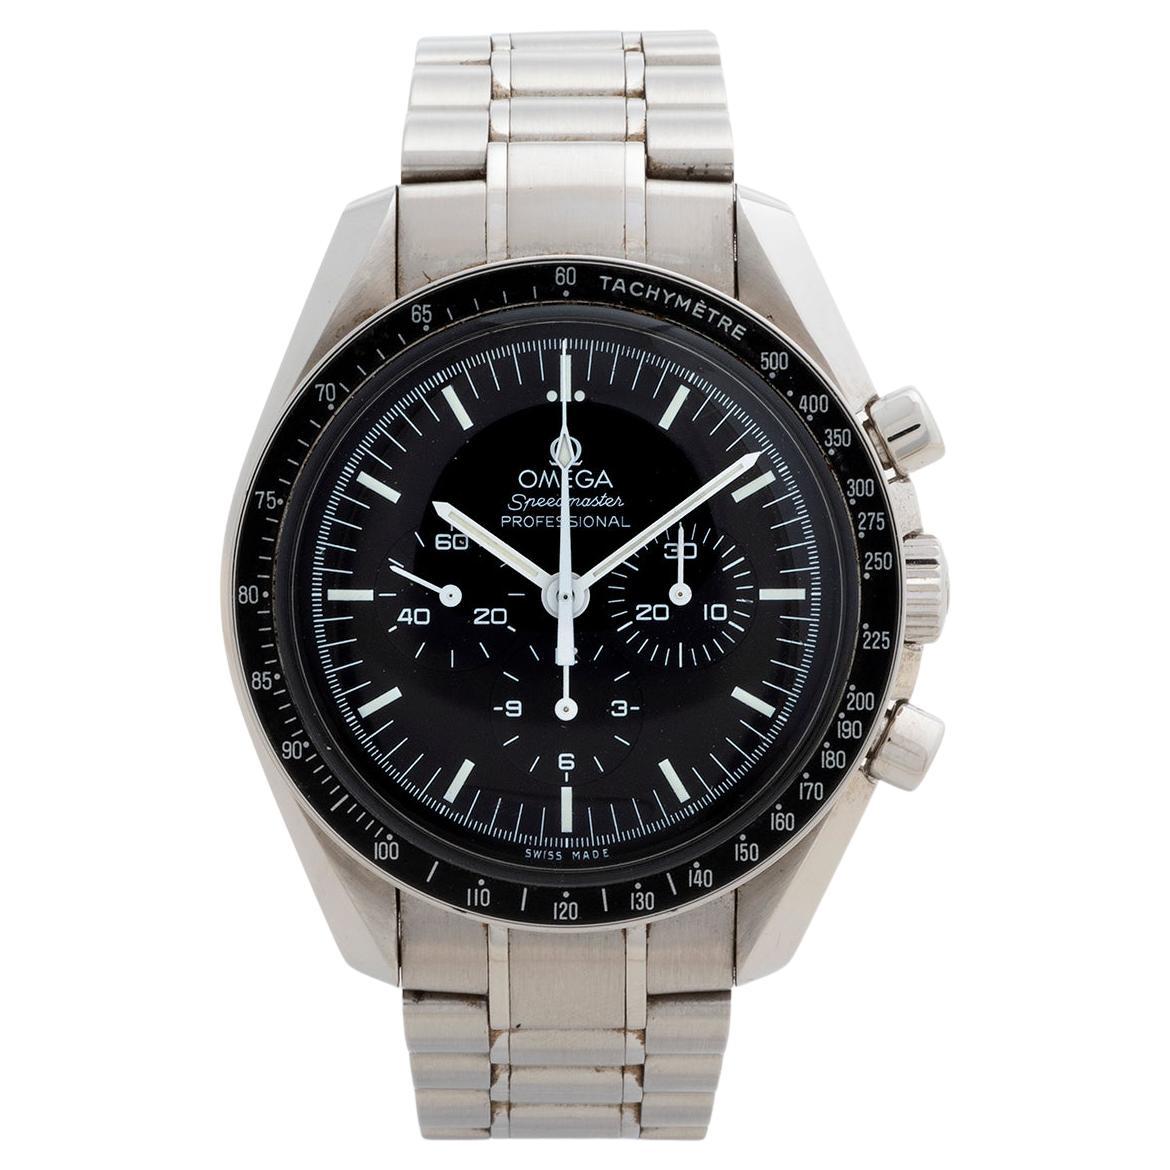 Omega Speedmaster Professional Moonwatch ref 37505000. (Discontinued). Yr 2014. For Sale